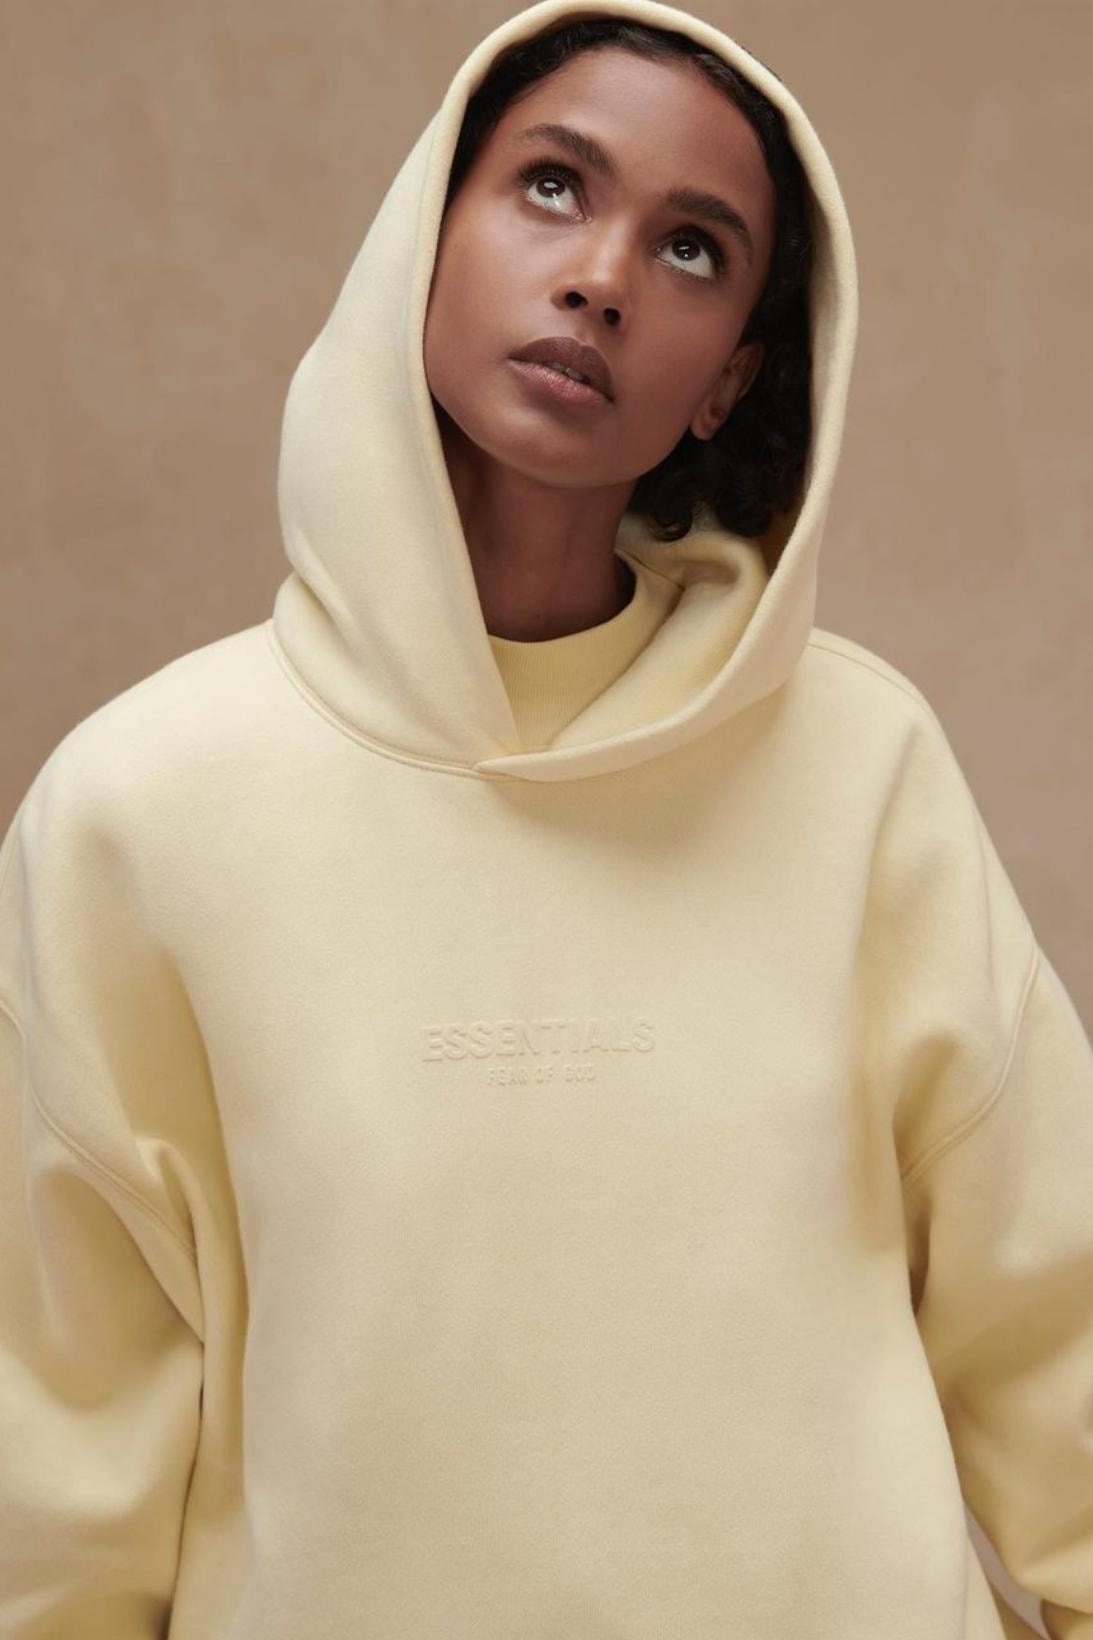 ESSENTIALS Women's Fall 2022 Drop 2 Collection